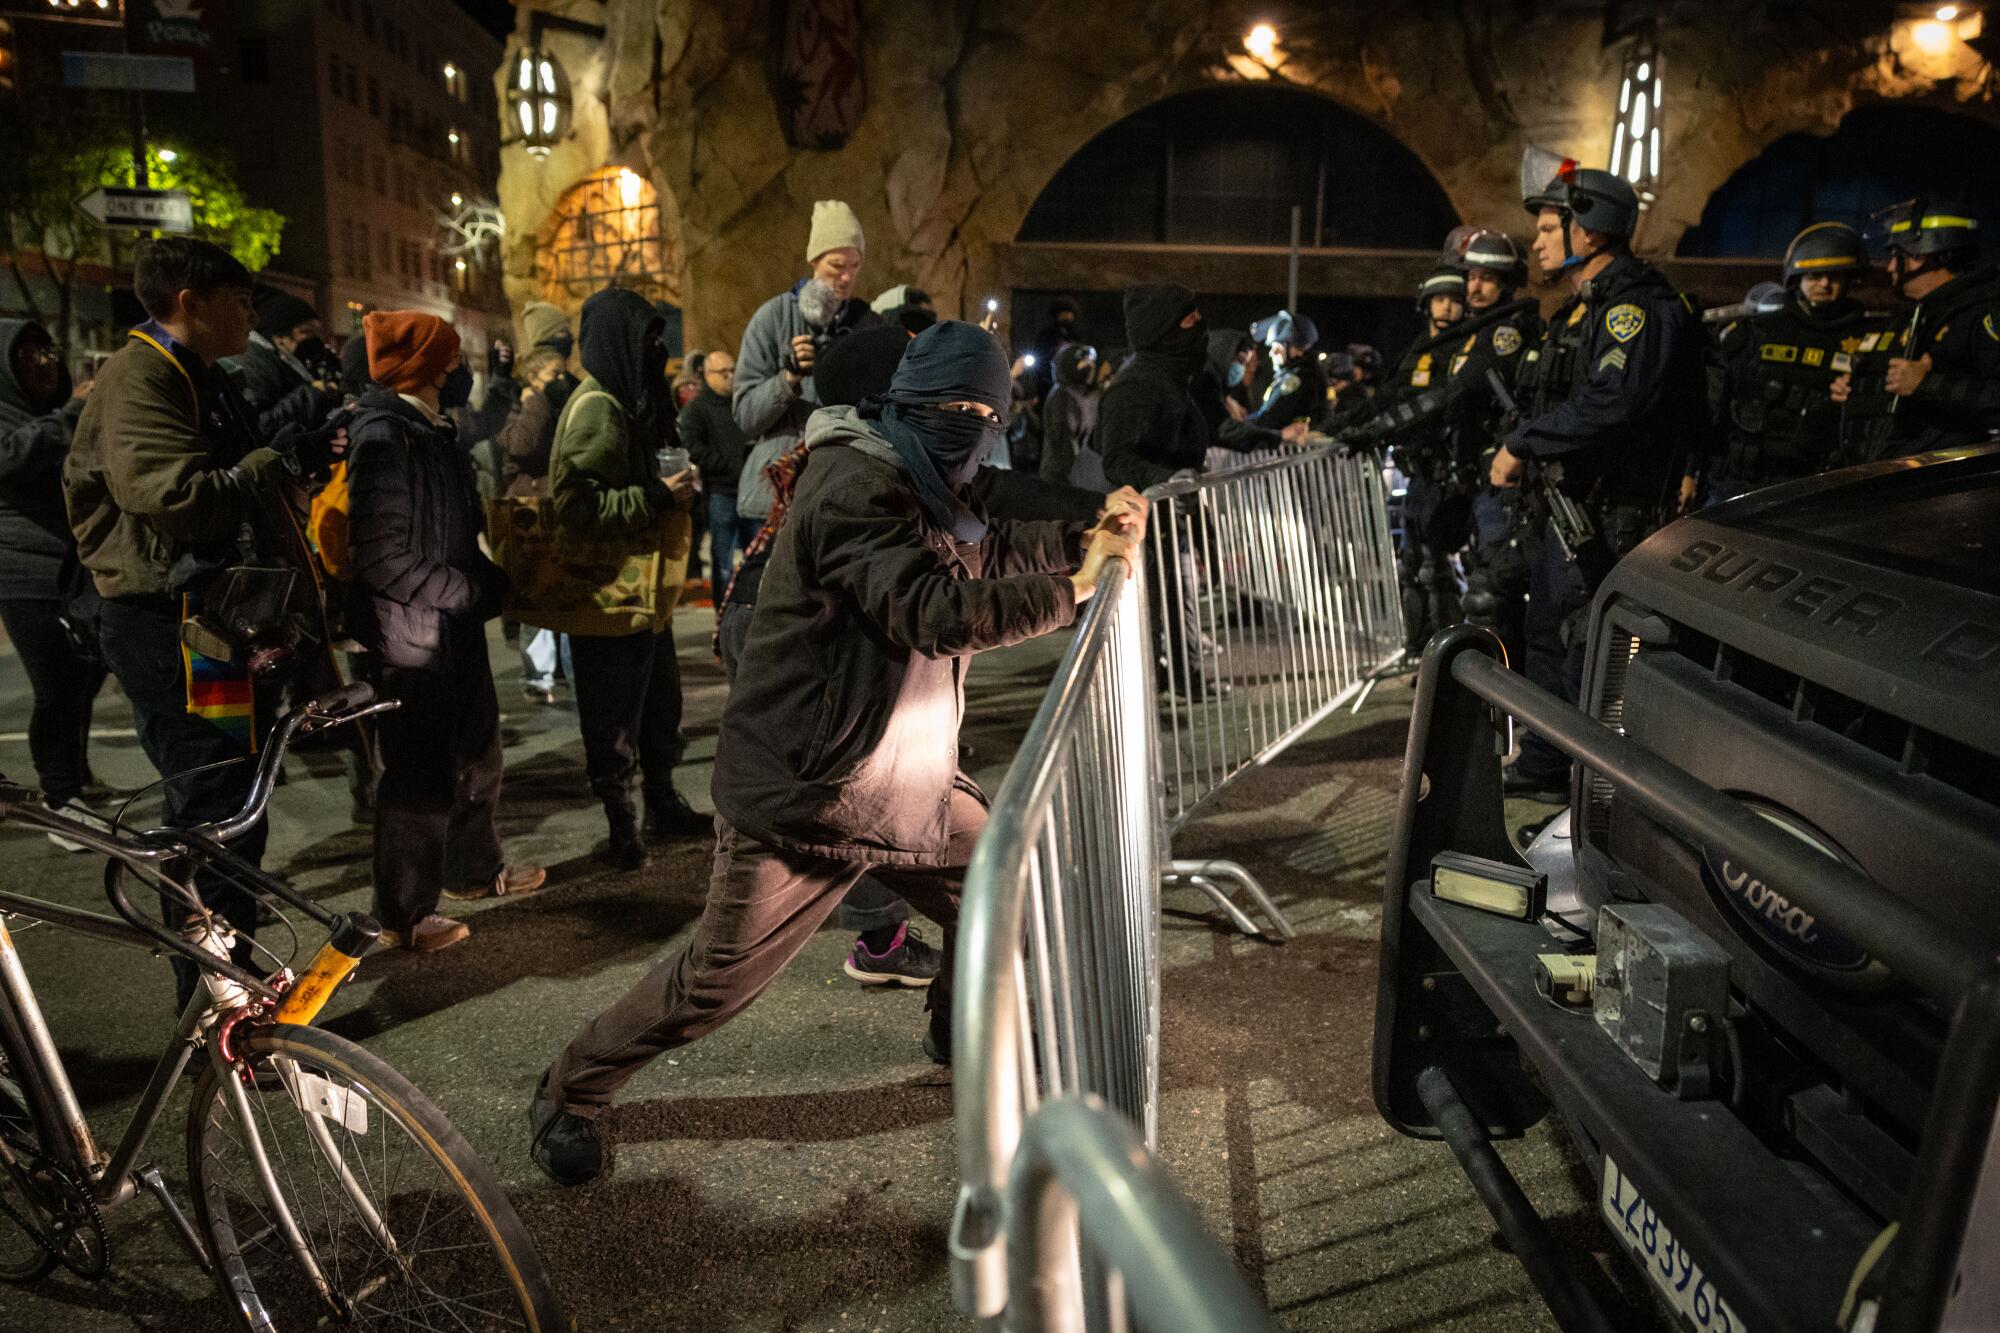 A masked man among a group of protesters wrestles with a metal crowd-control barrier as police look on